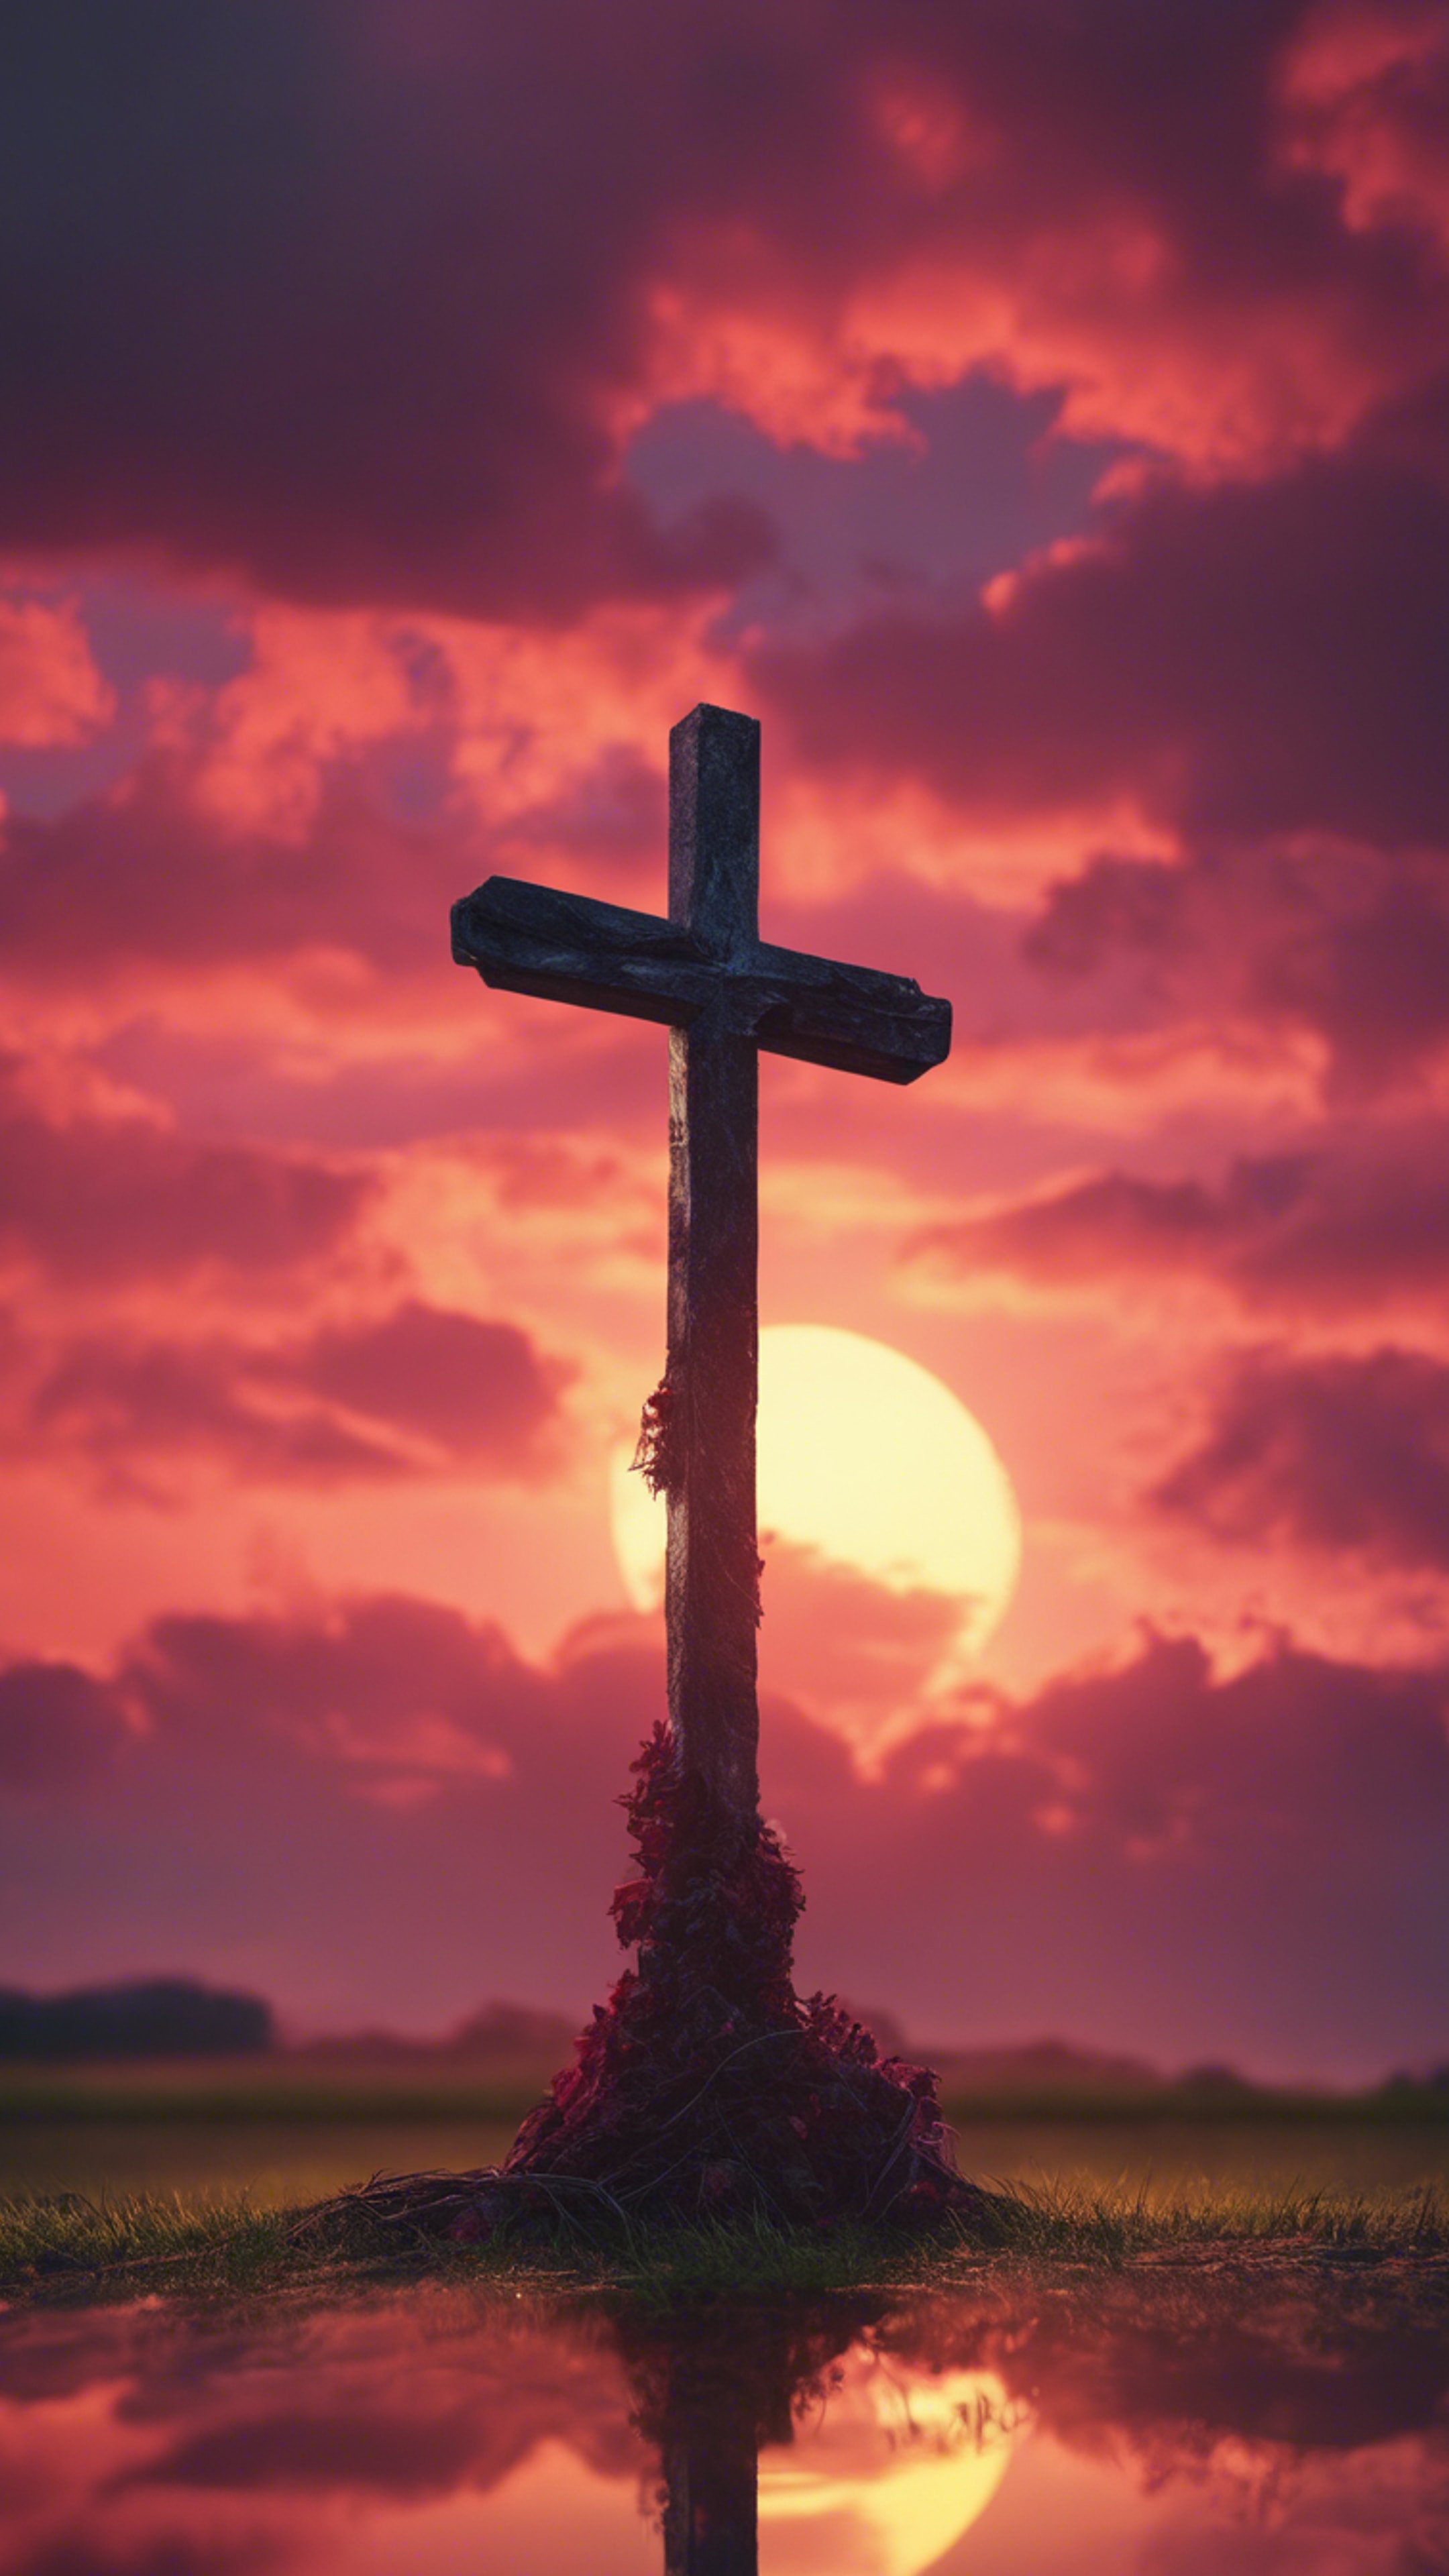 A cross standing against the crimson colors of a sunset sky. Tapet[b41808c7967b41aa9e40]